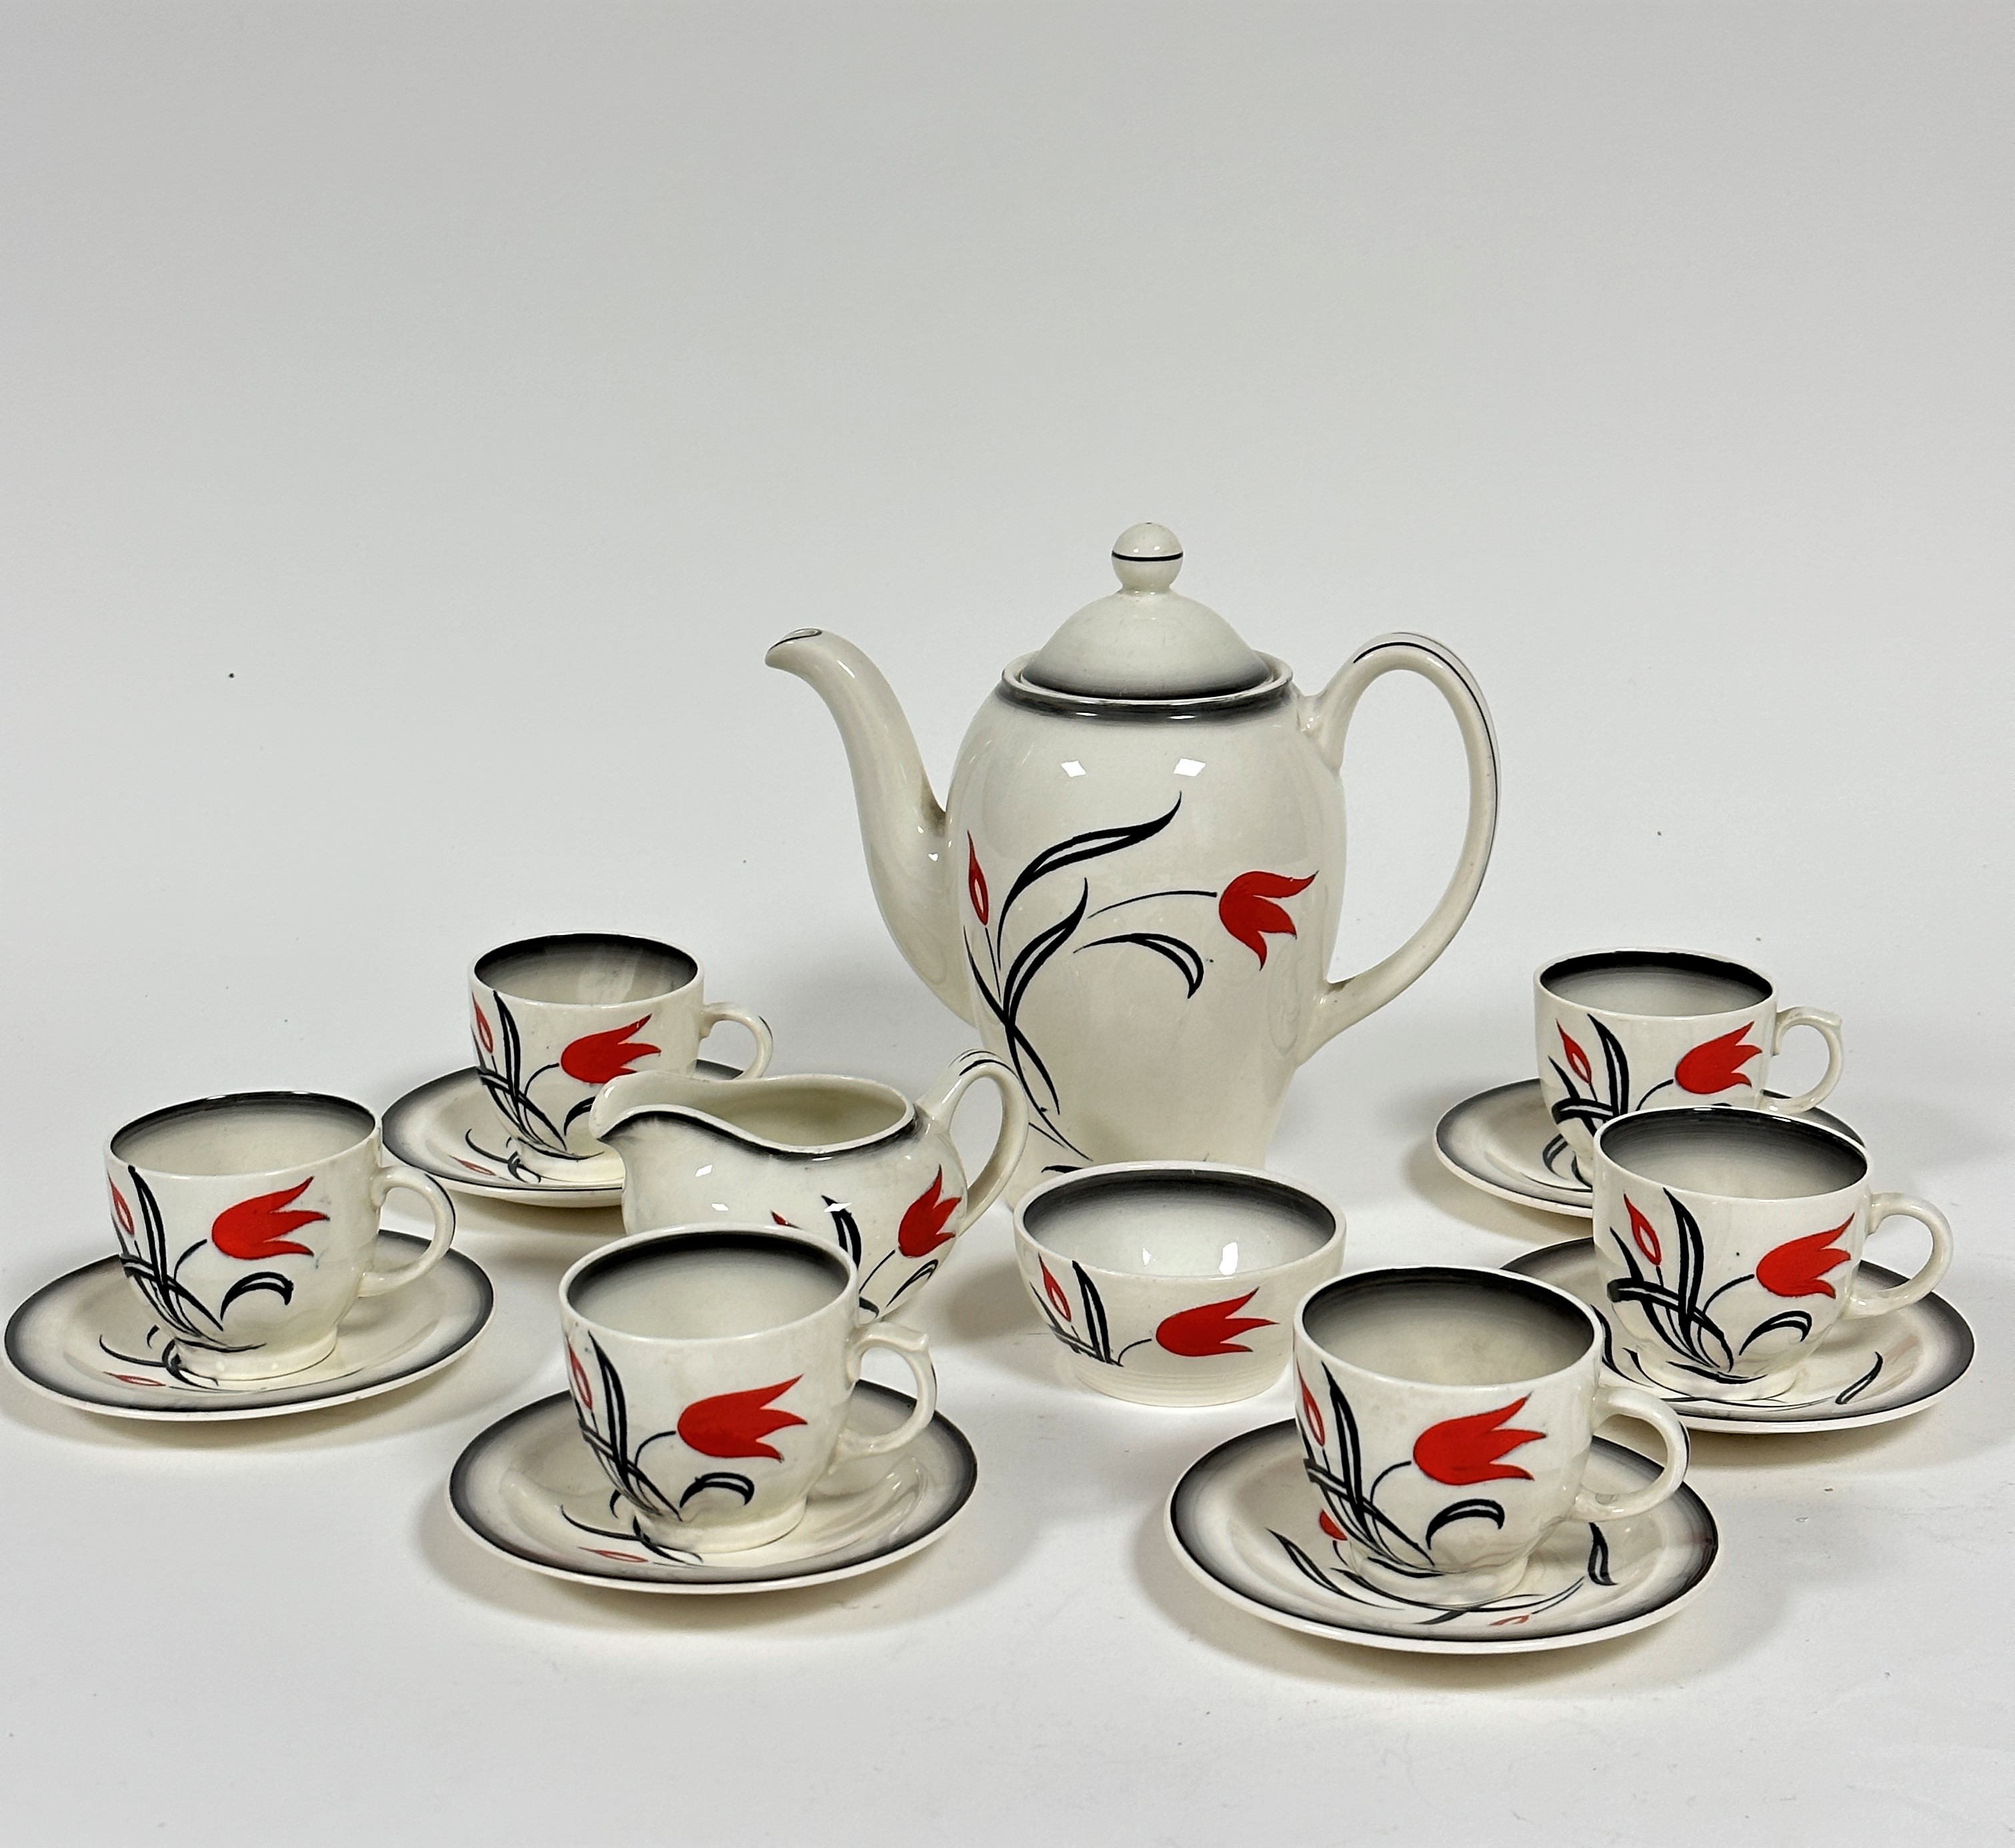 A Wood & Son England Flamenco pattern fifteen piece coffee set complete with baluster coffee pot